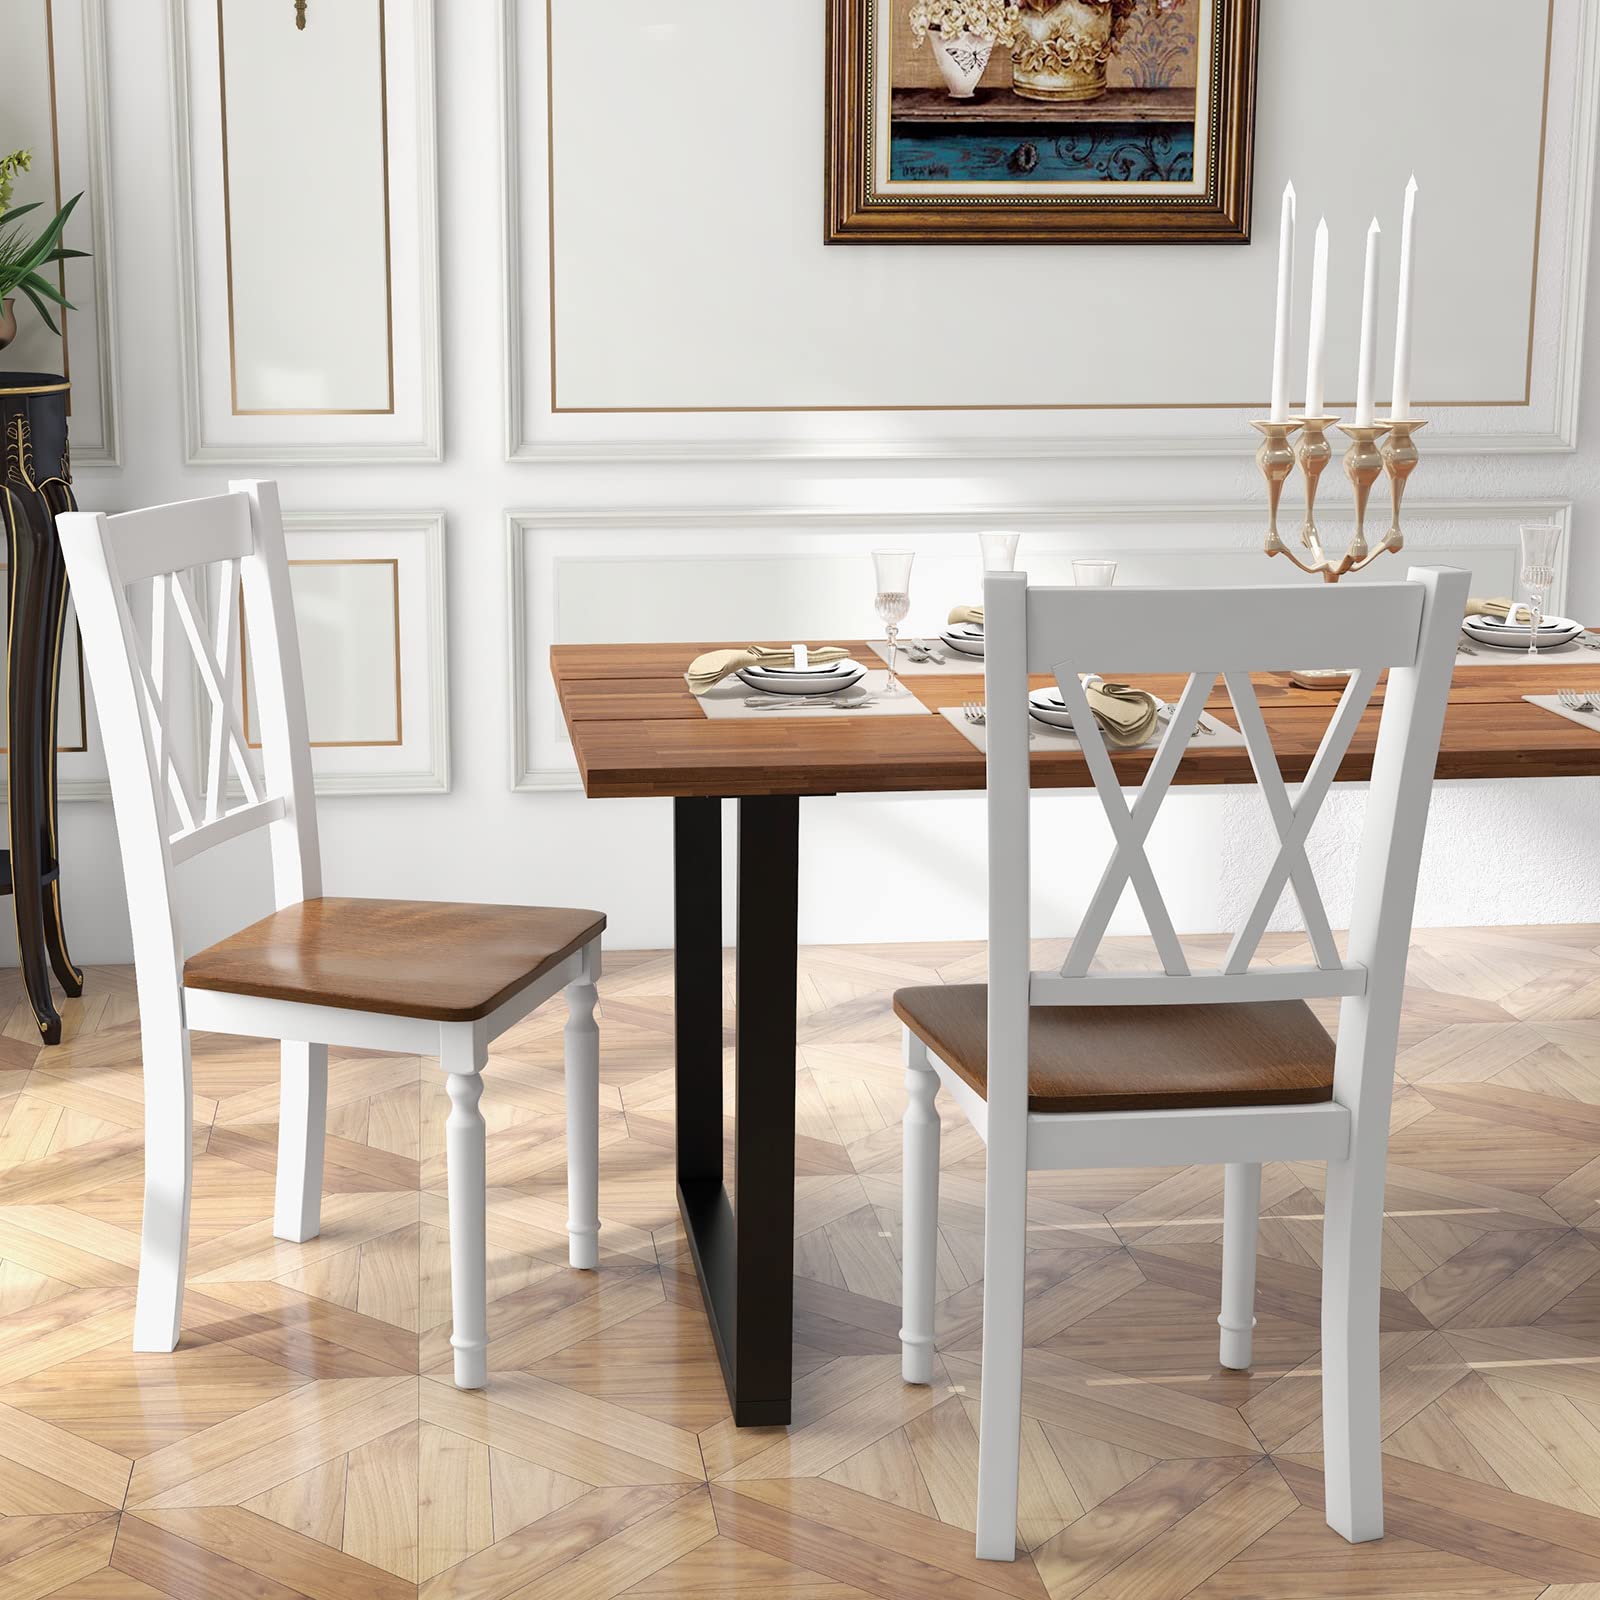 Giantex Dining Room Chairs Set of 4 White - Wooden Farmhouse Kitchen Chairs with Rubber Wood Seat